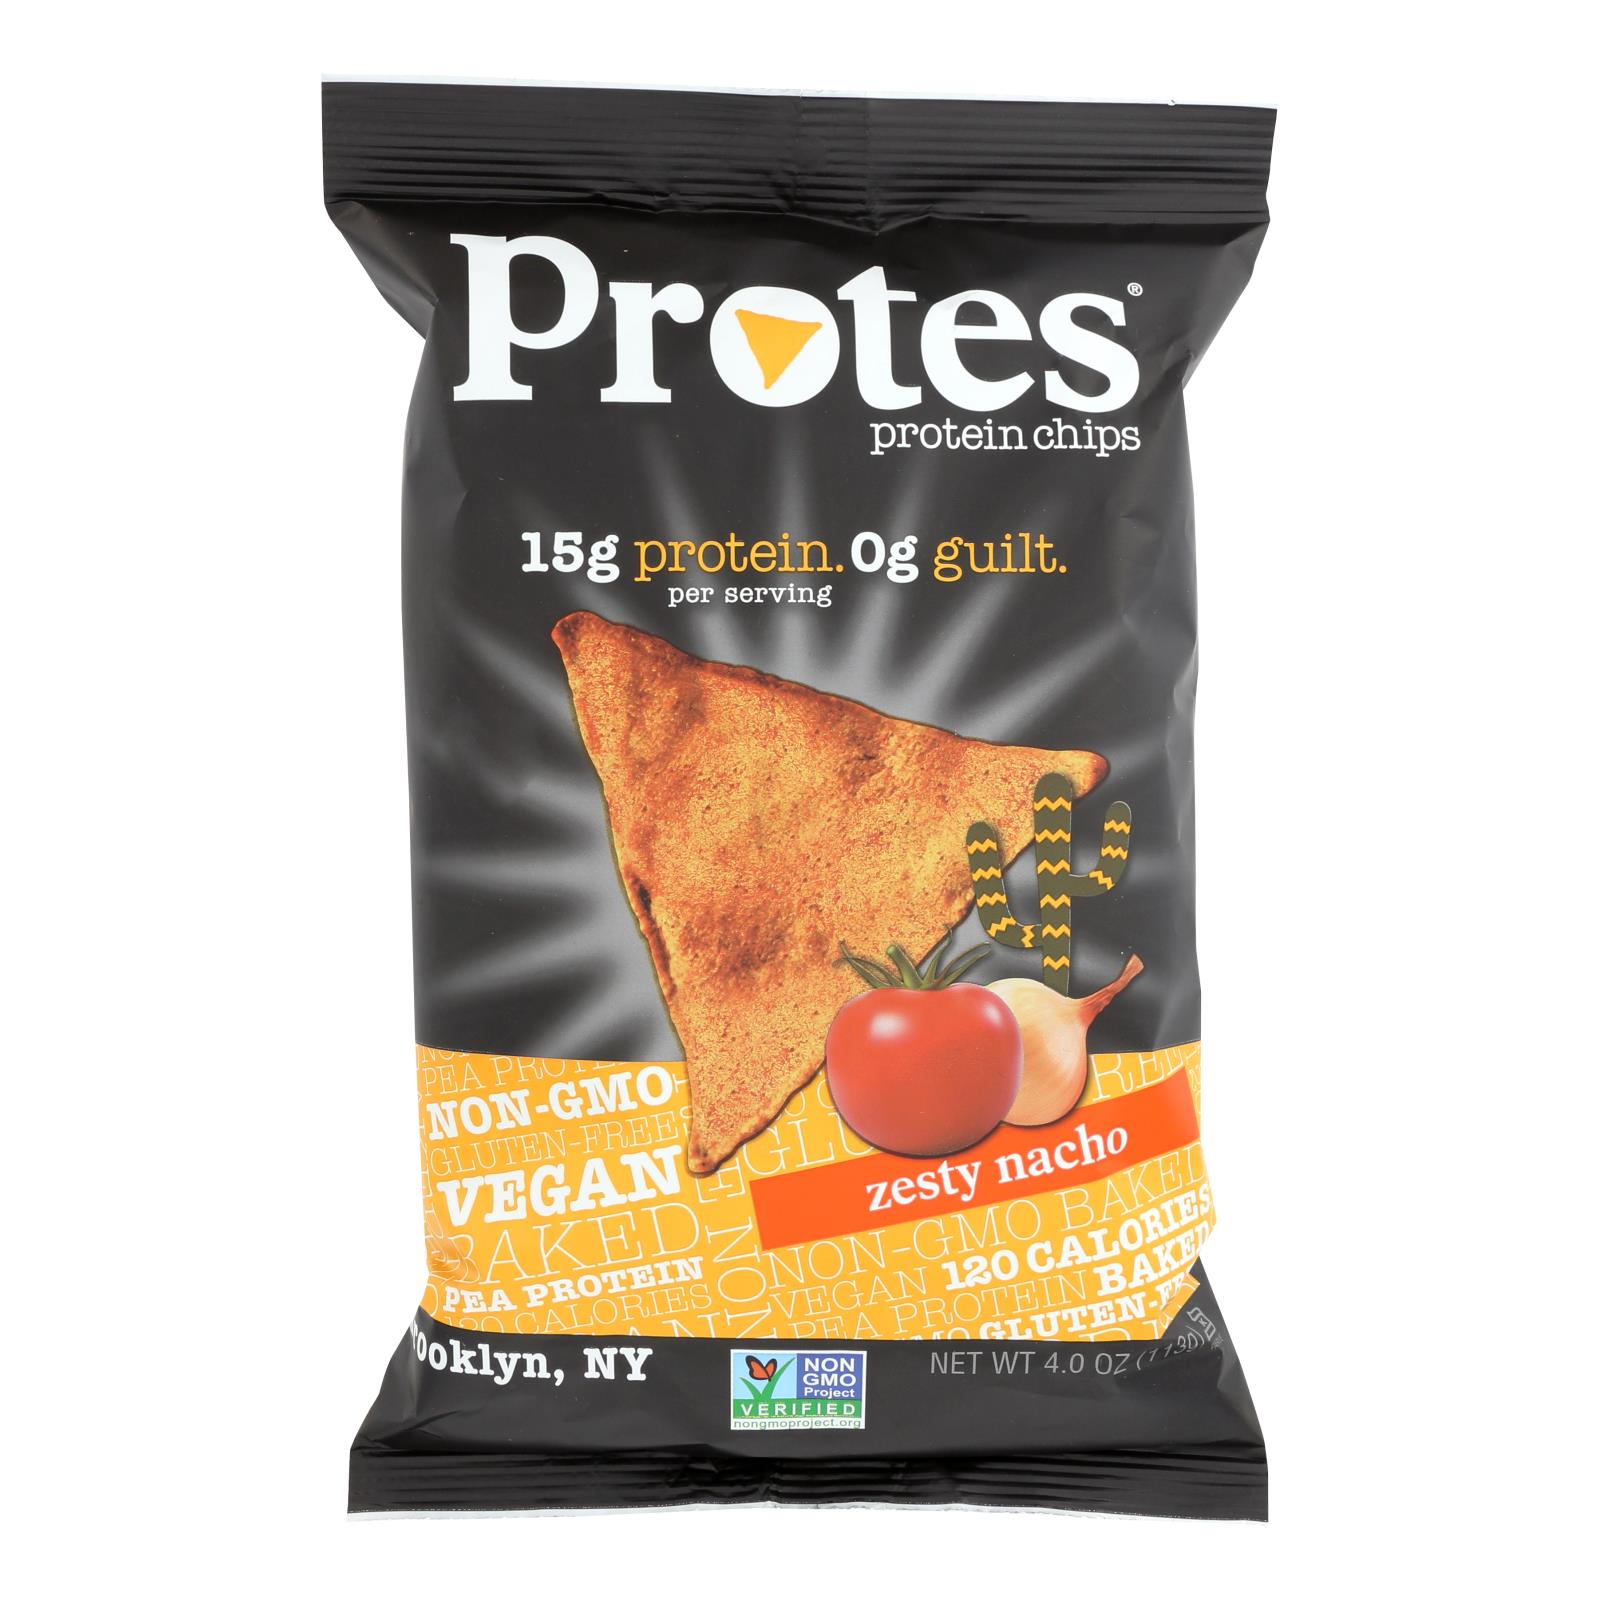 Protes Protein Chips Protein Chips - Case of 12 - 4 OZ